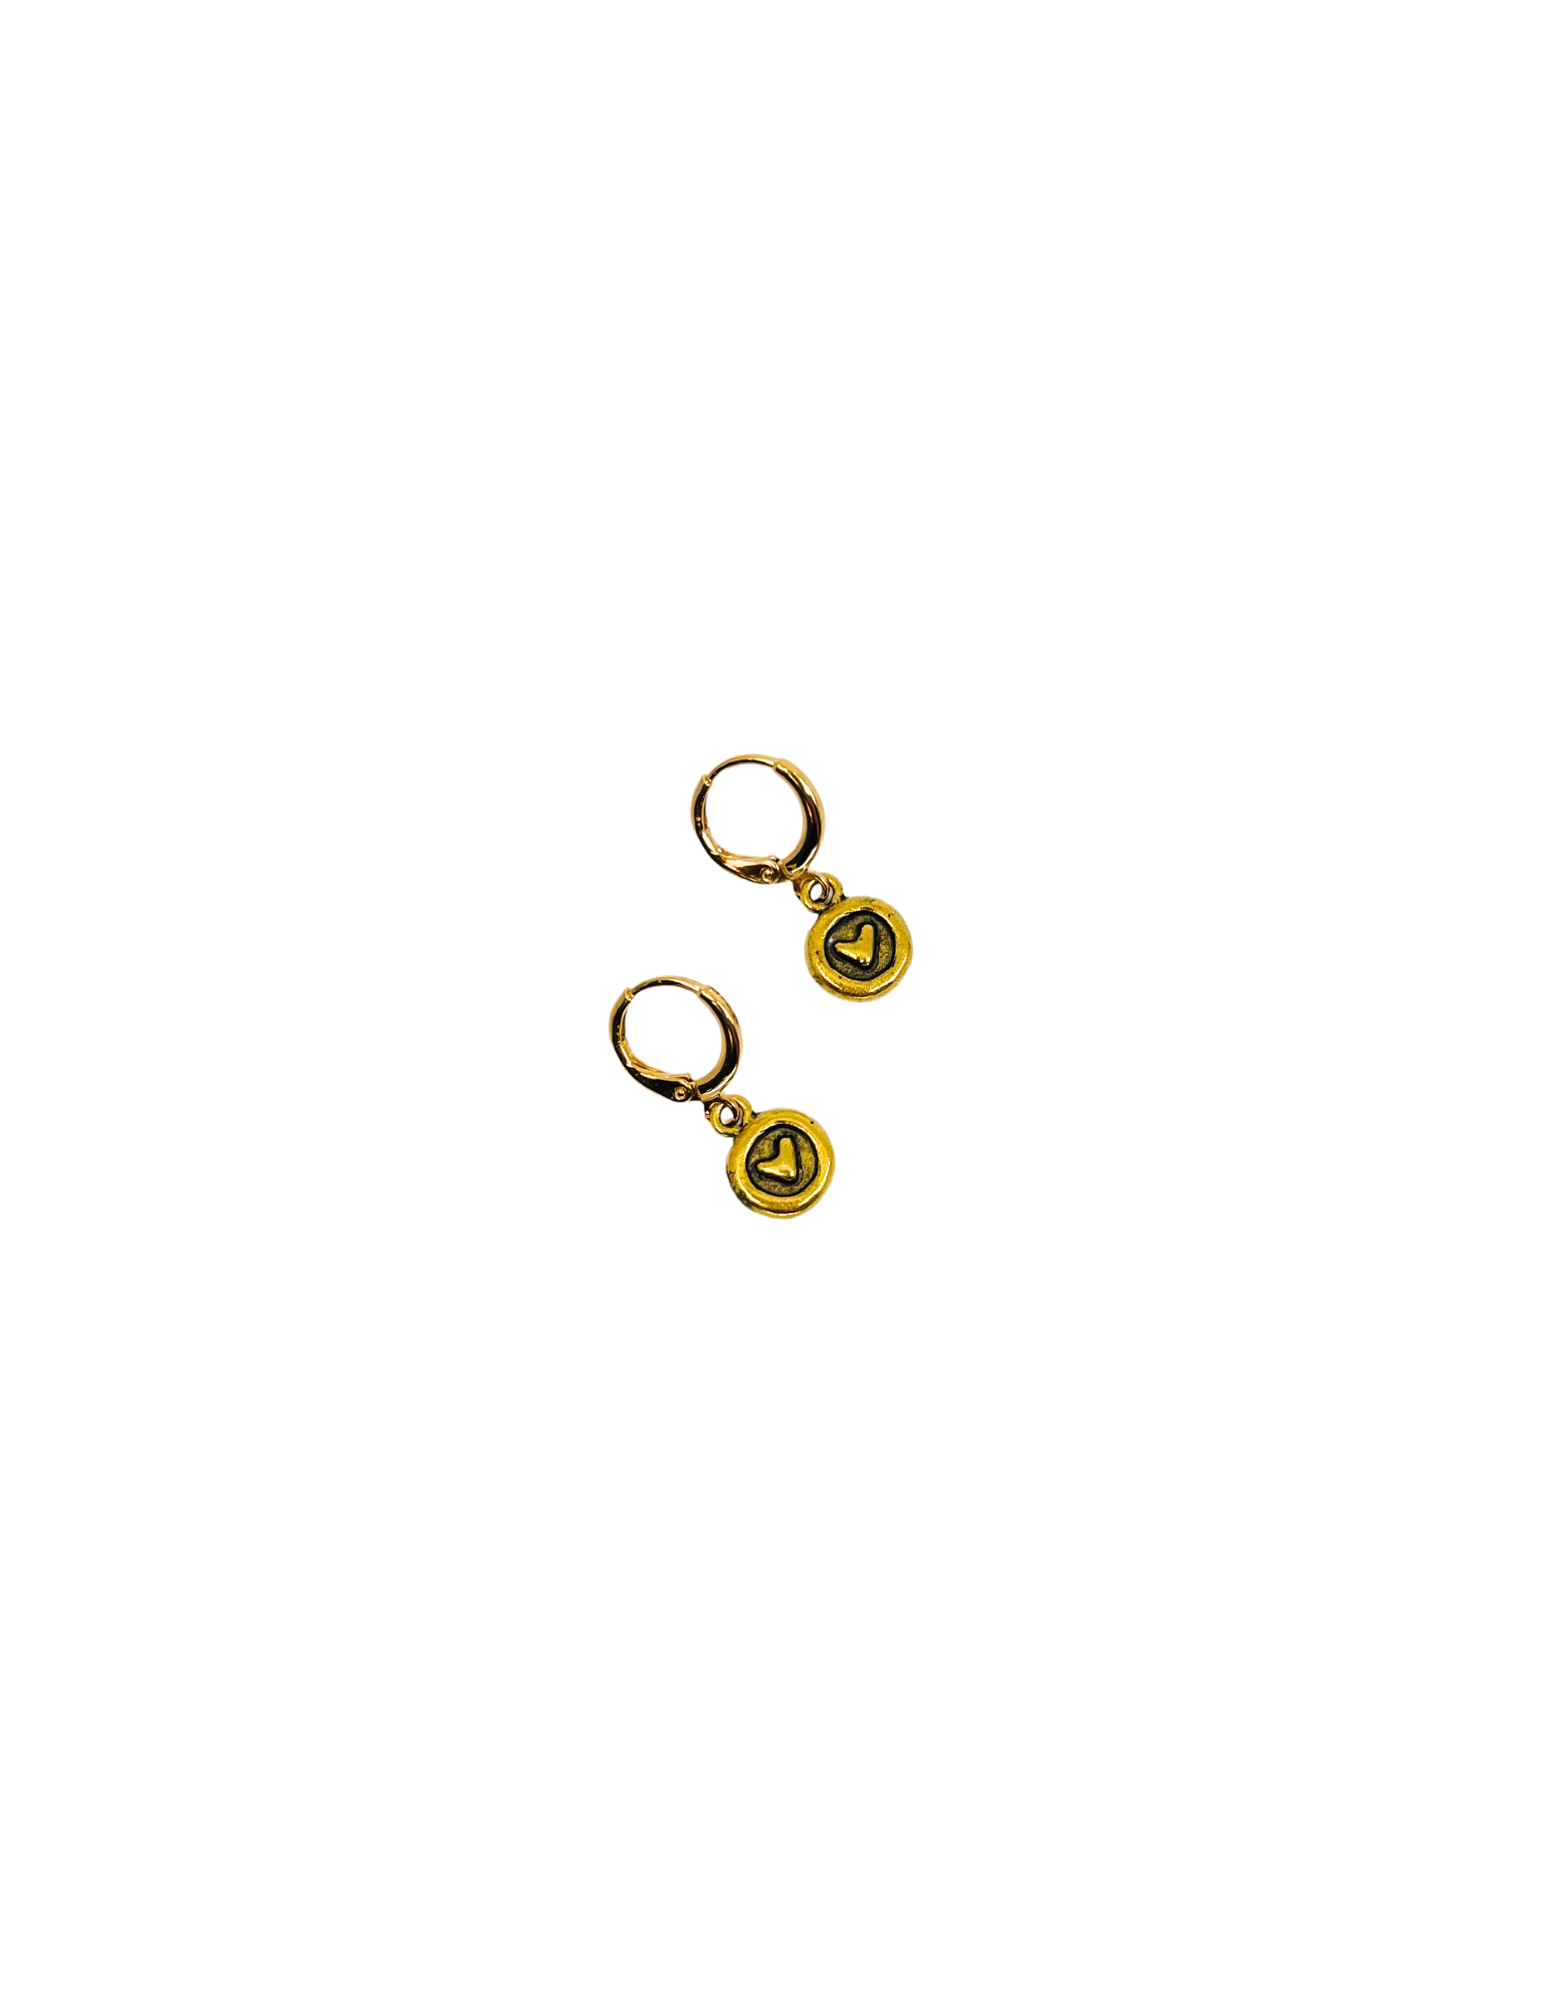 The Circle with Heart Earrings